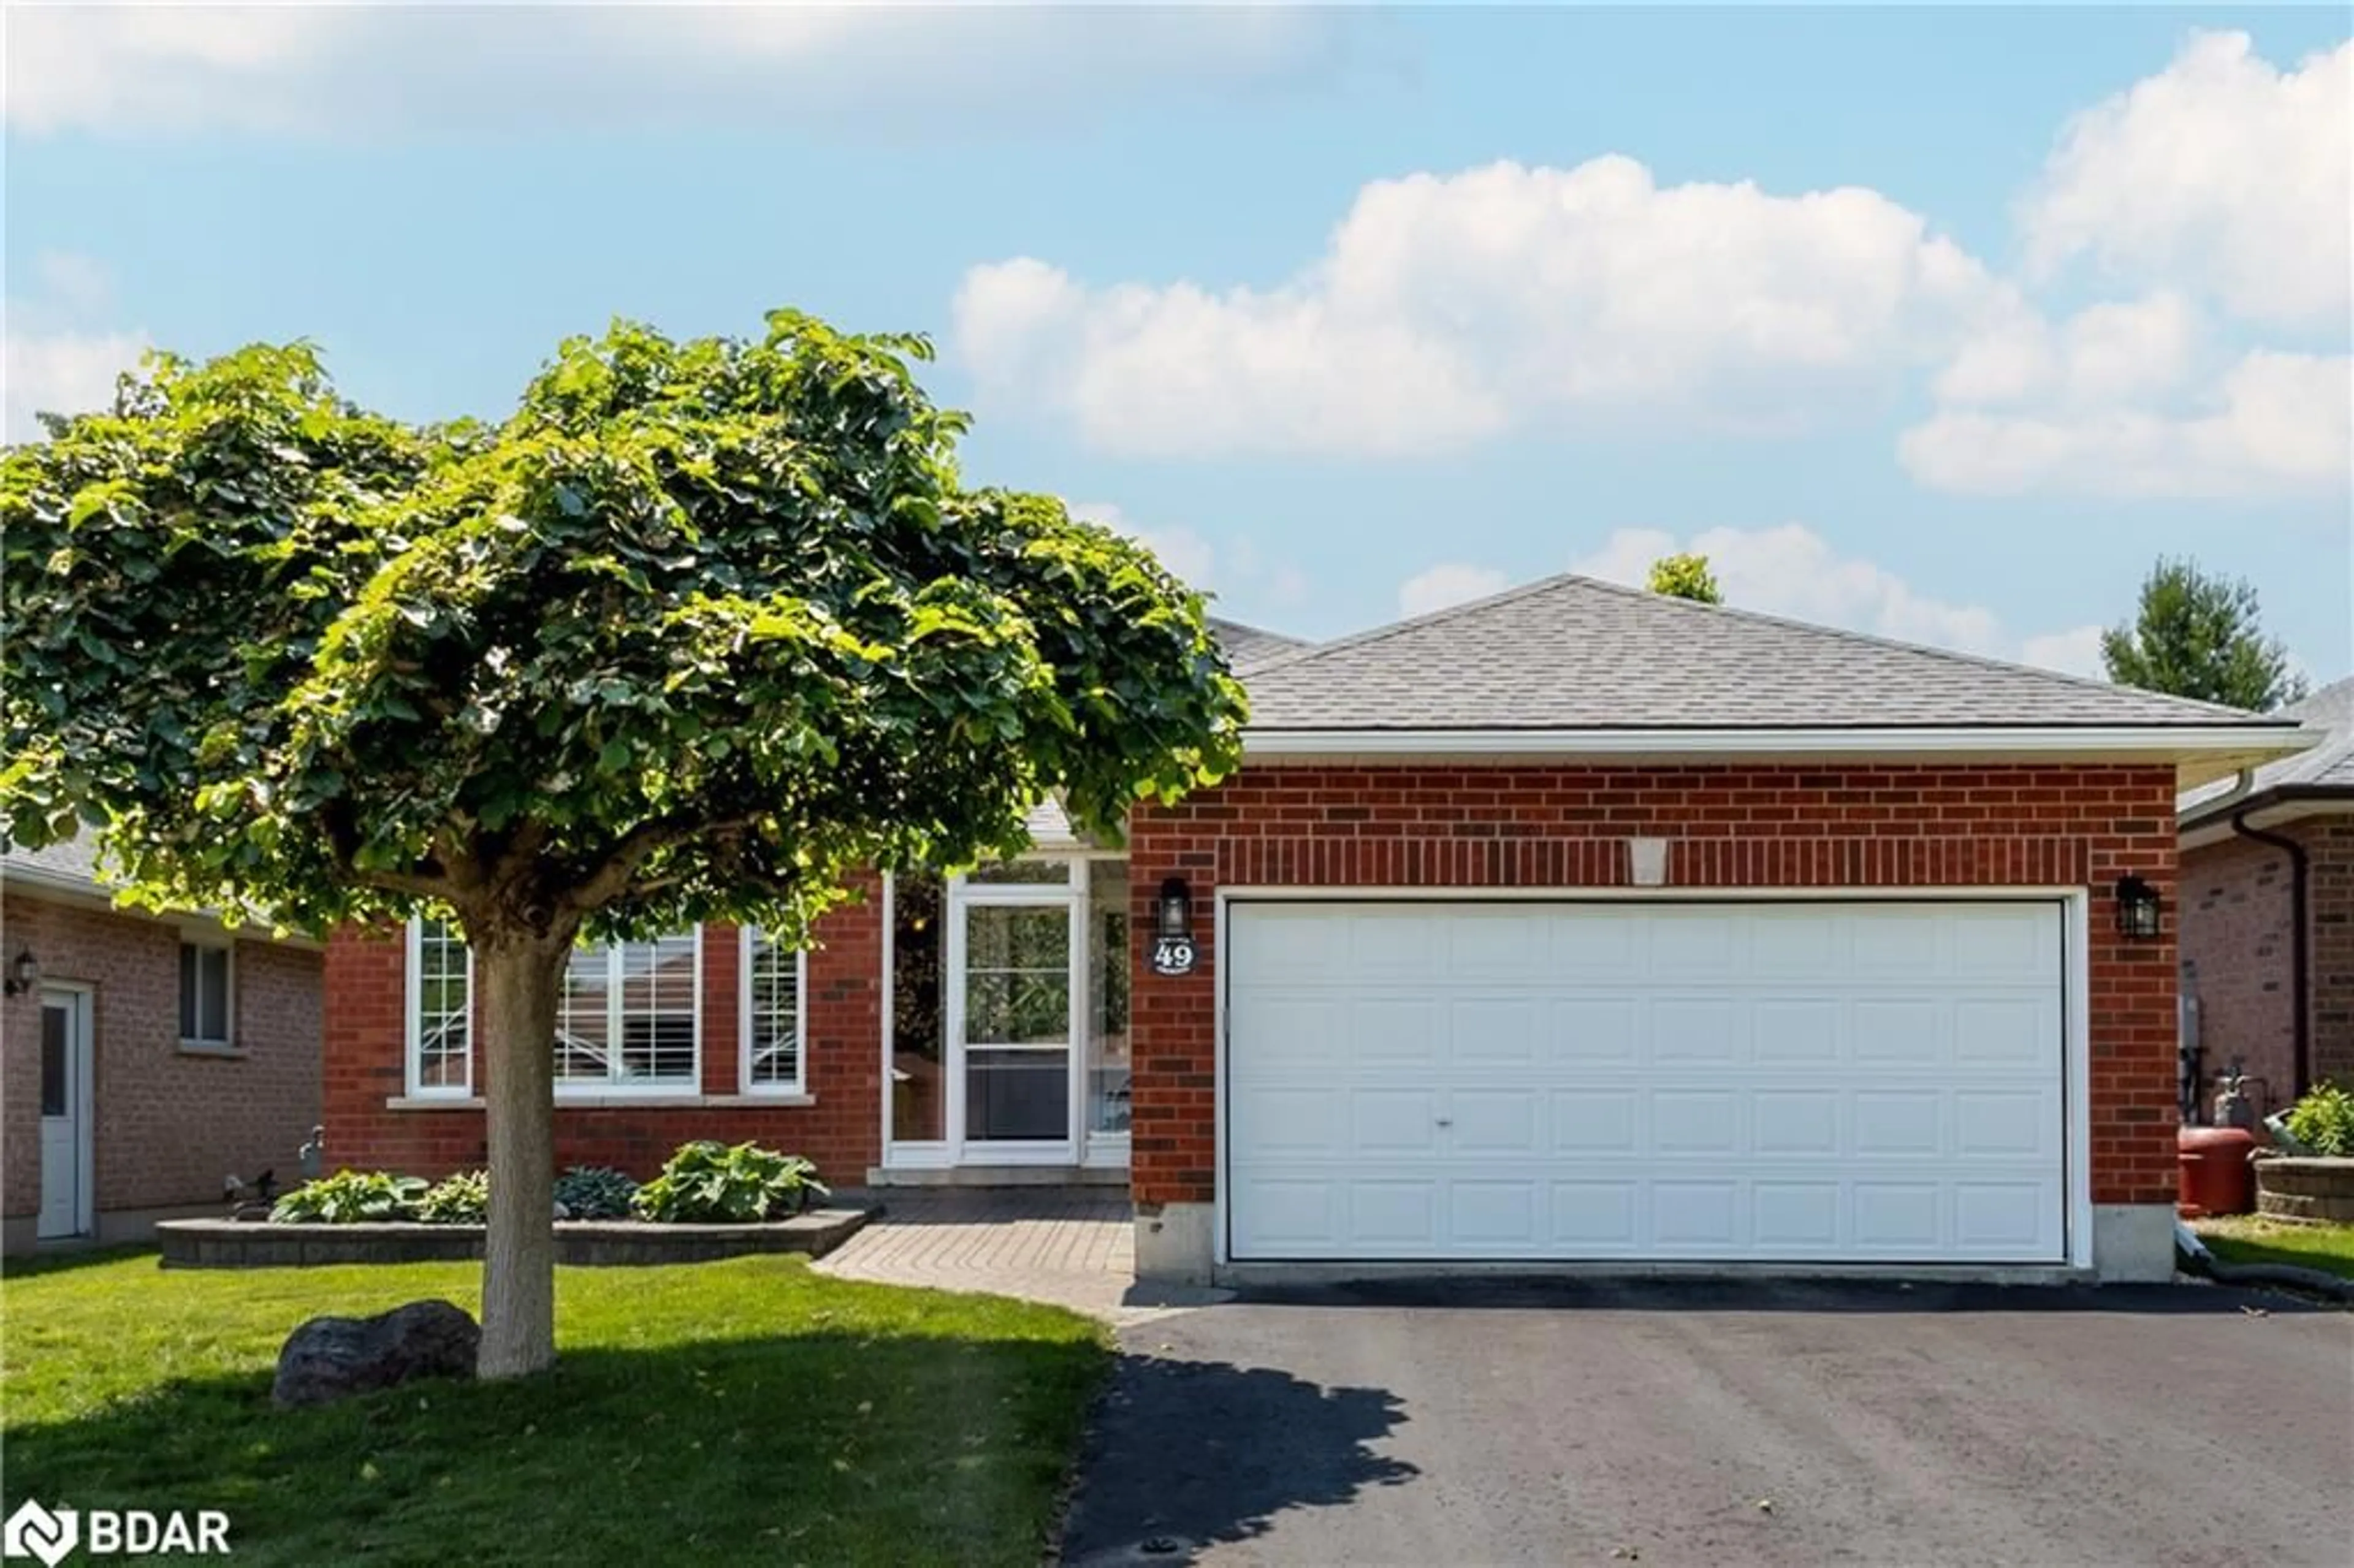 Home with brick exterior material for 49 Chelsea Cres, Belleville Ontario K8N 4Z5